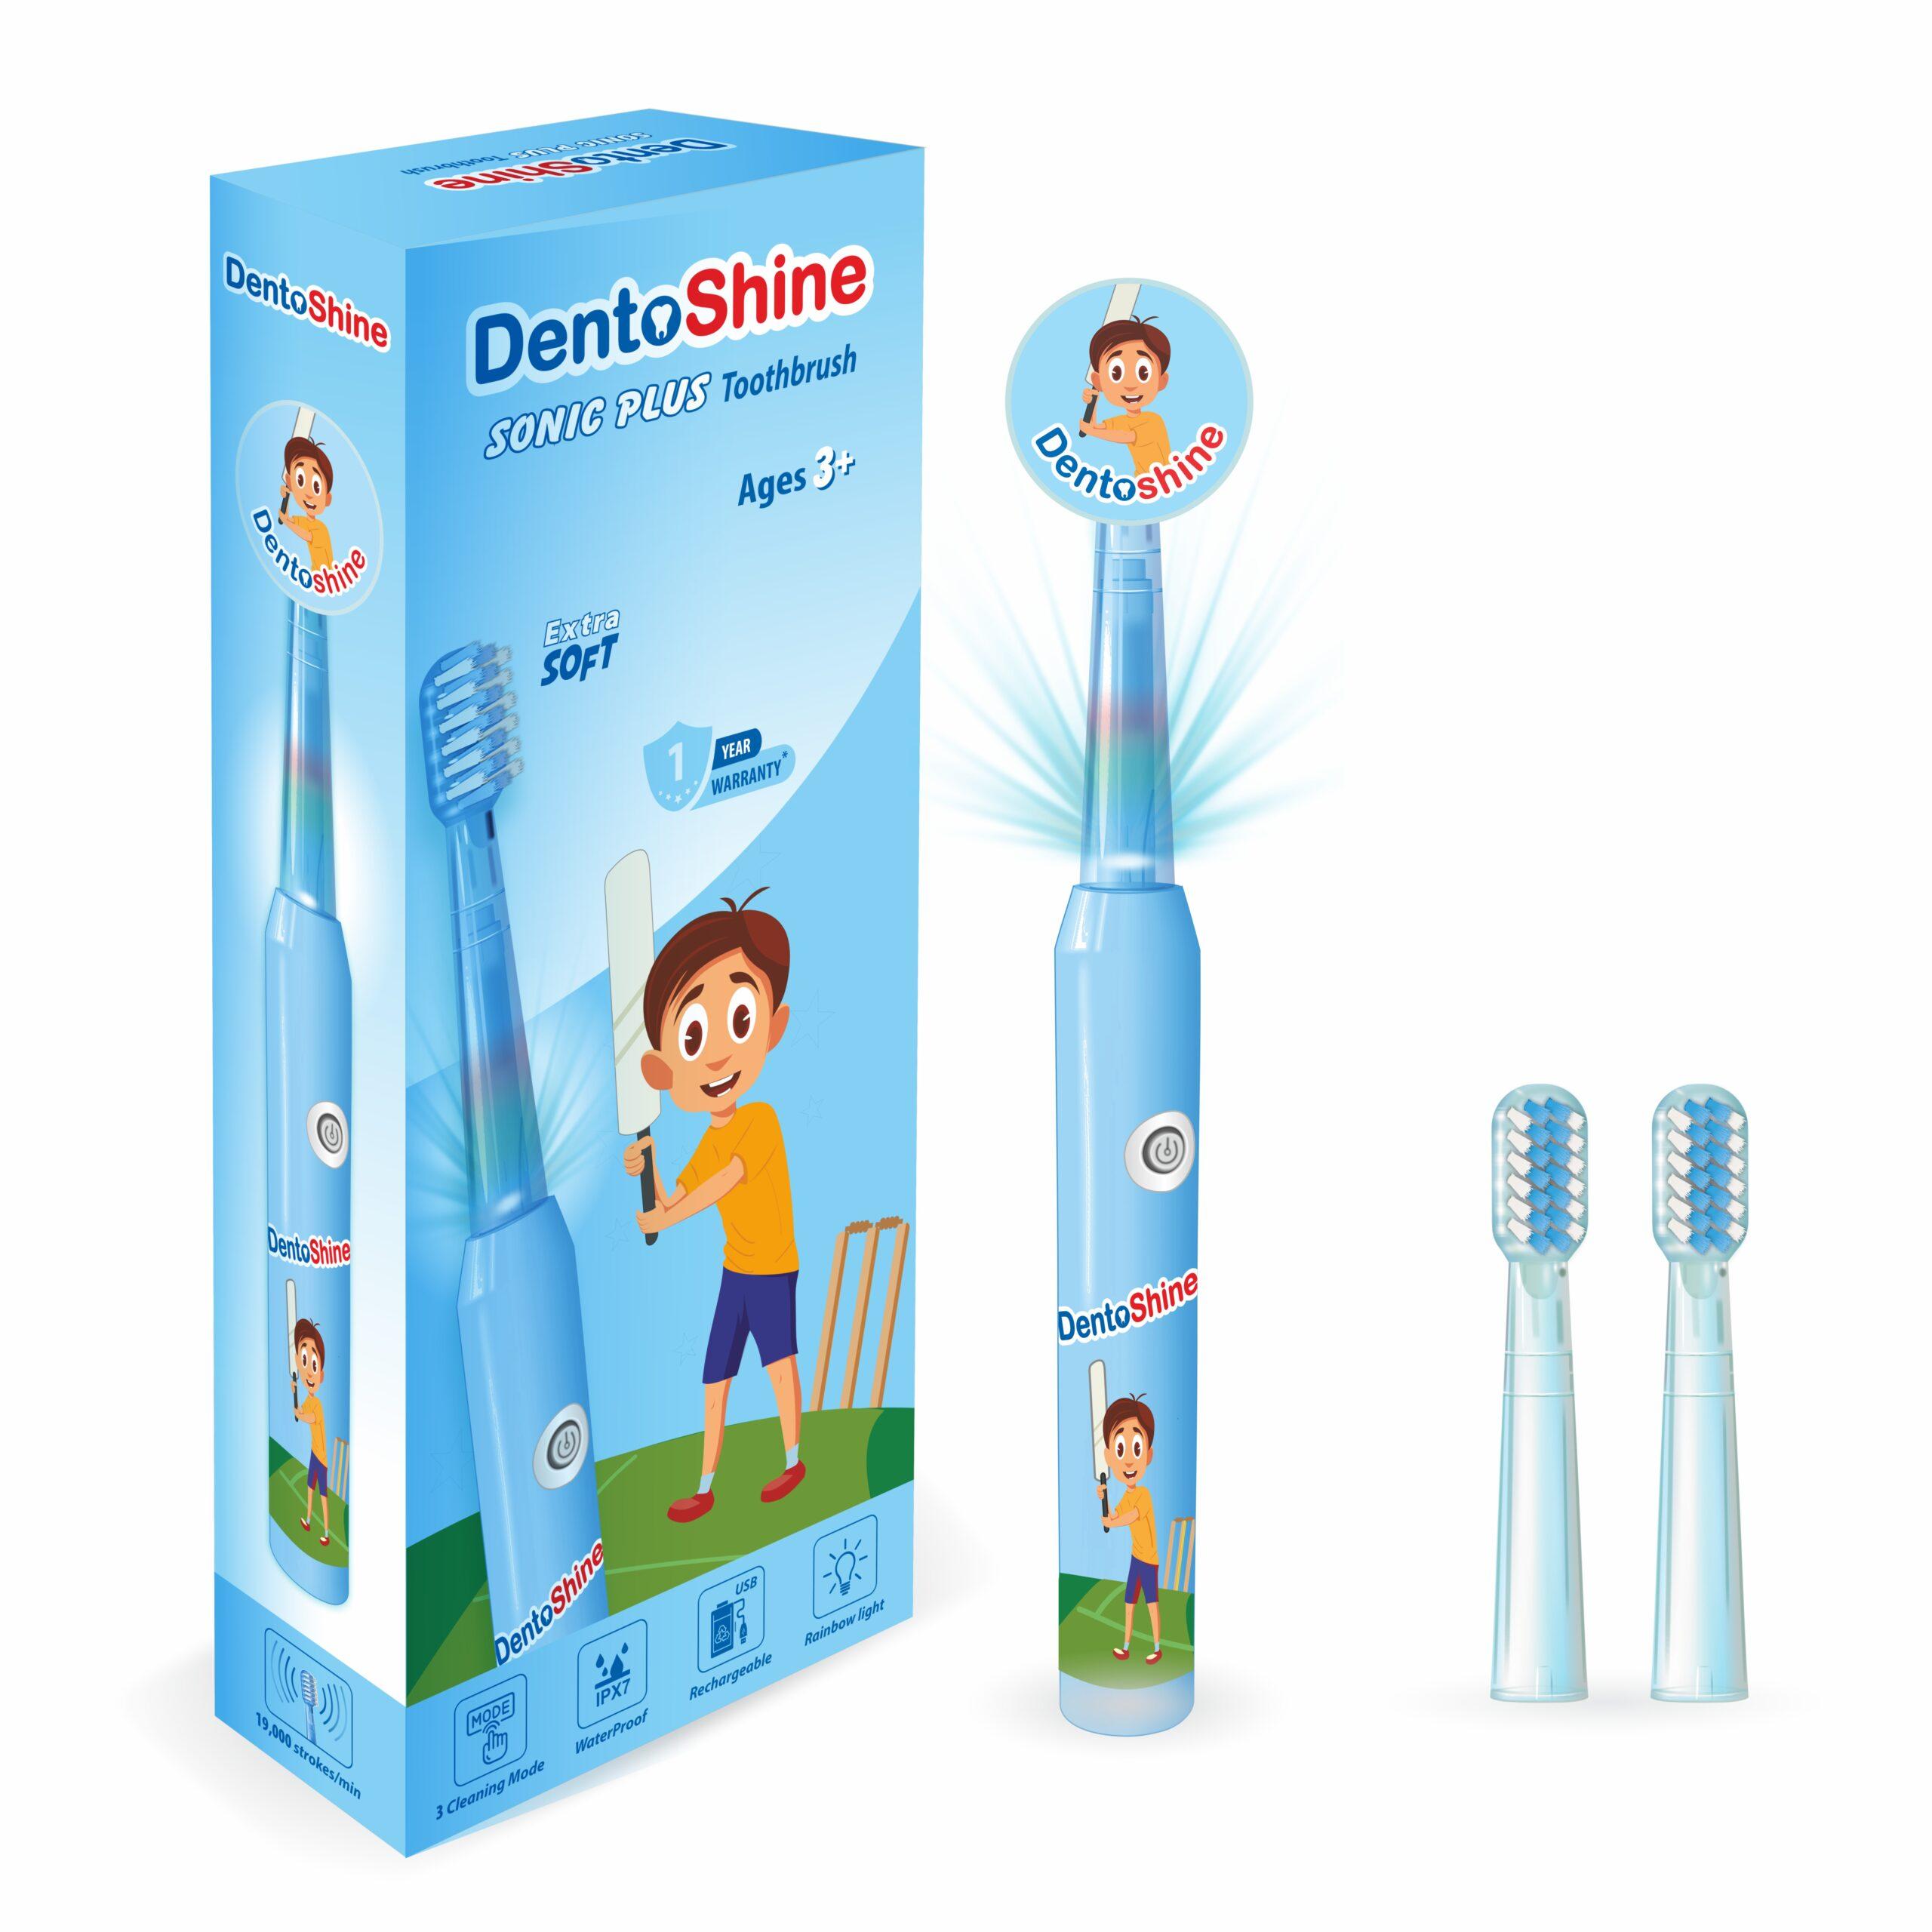 DentoShine Sonic Plus Electric Toothbrush for kids (Ages 3+) | 3 modes of cleaning & 2 extra brush heads (Blue)